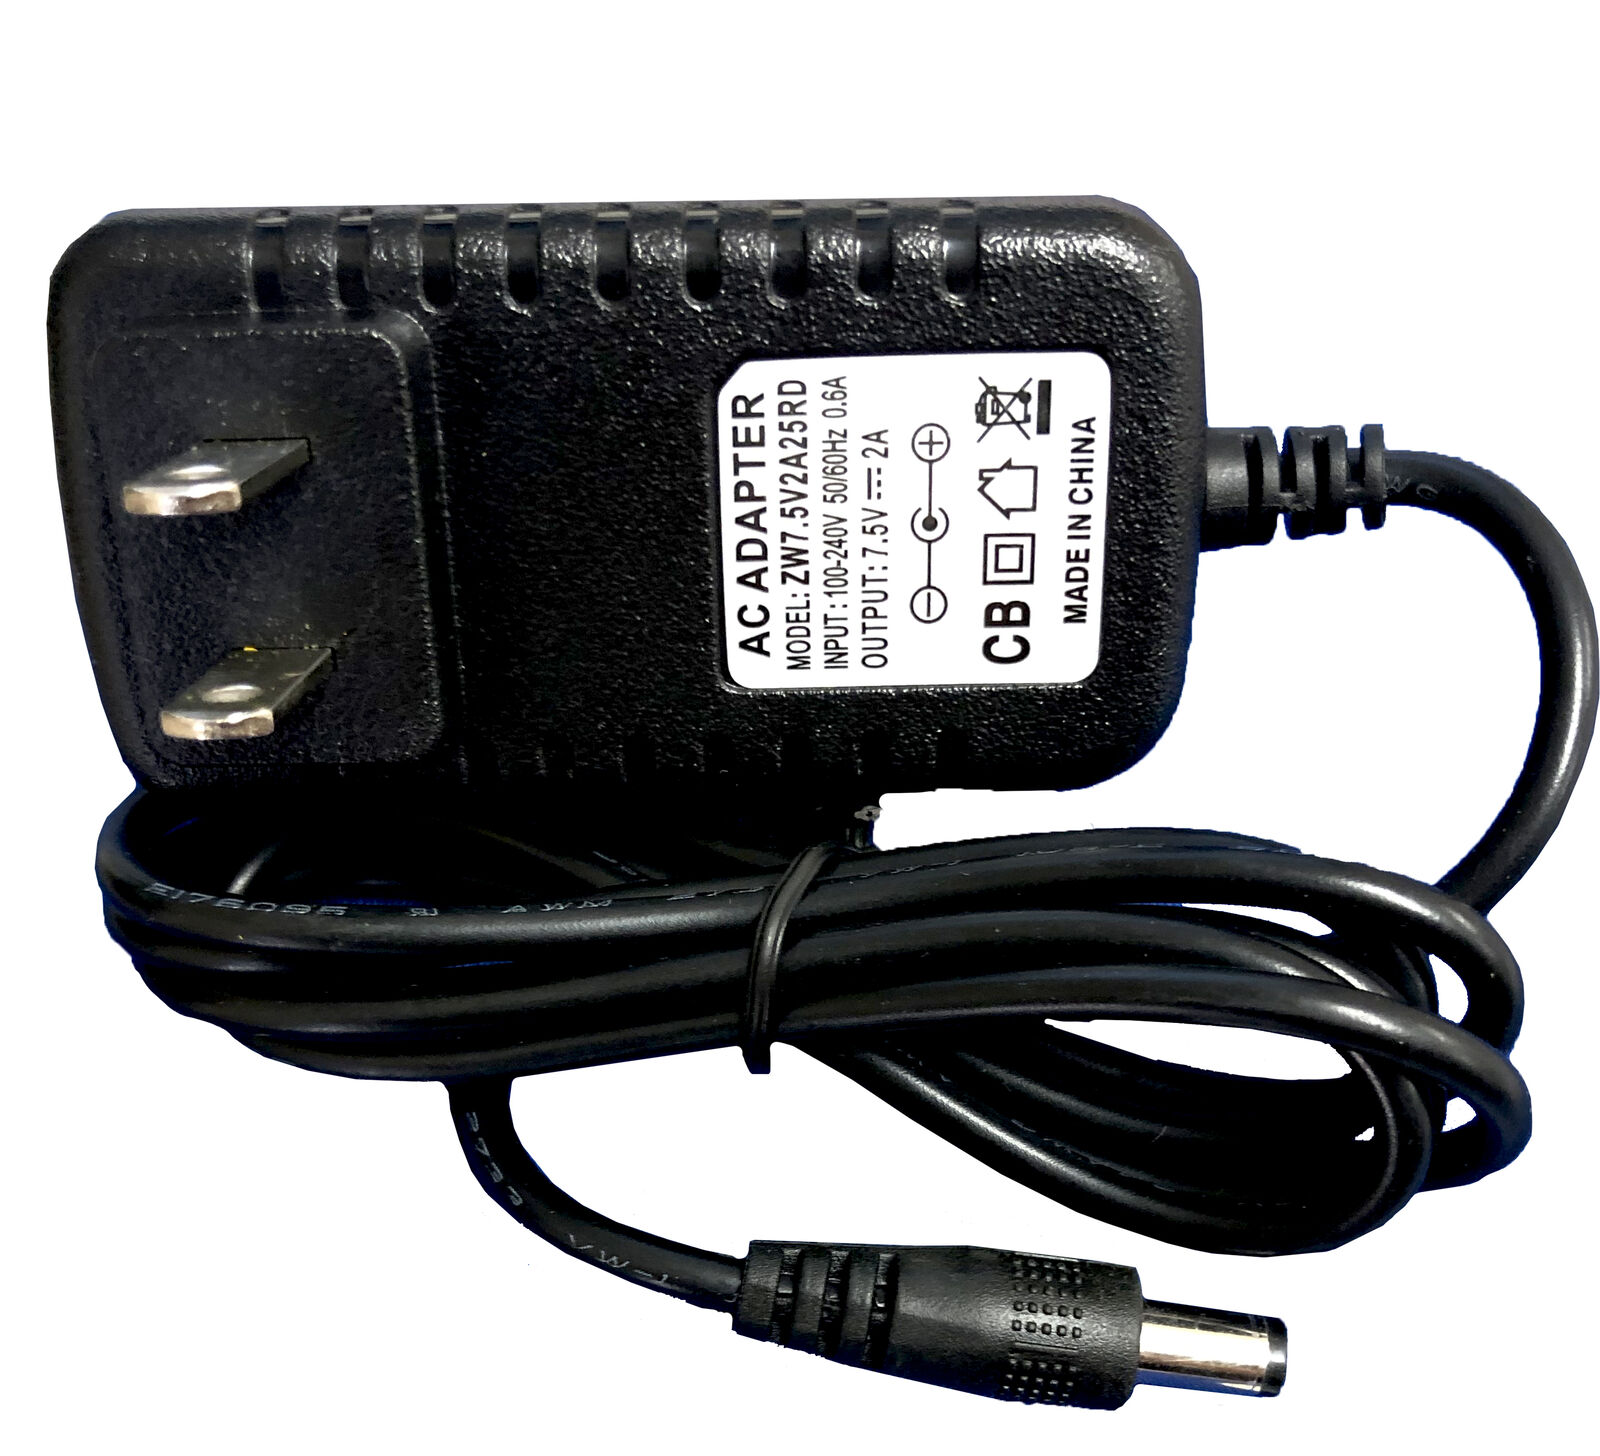 7.5V 2A 15W AC to DC Adapter Power supply charger For CASIO AD-1 SA-75 KEYBOARD Type: AC/DC Adapter MPN: Does Not App